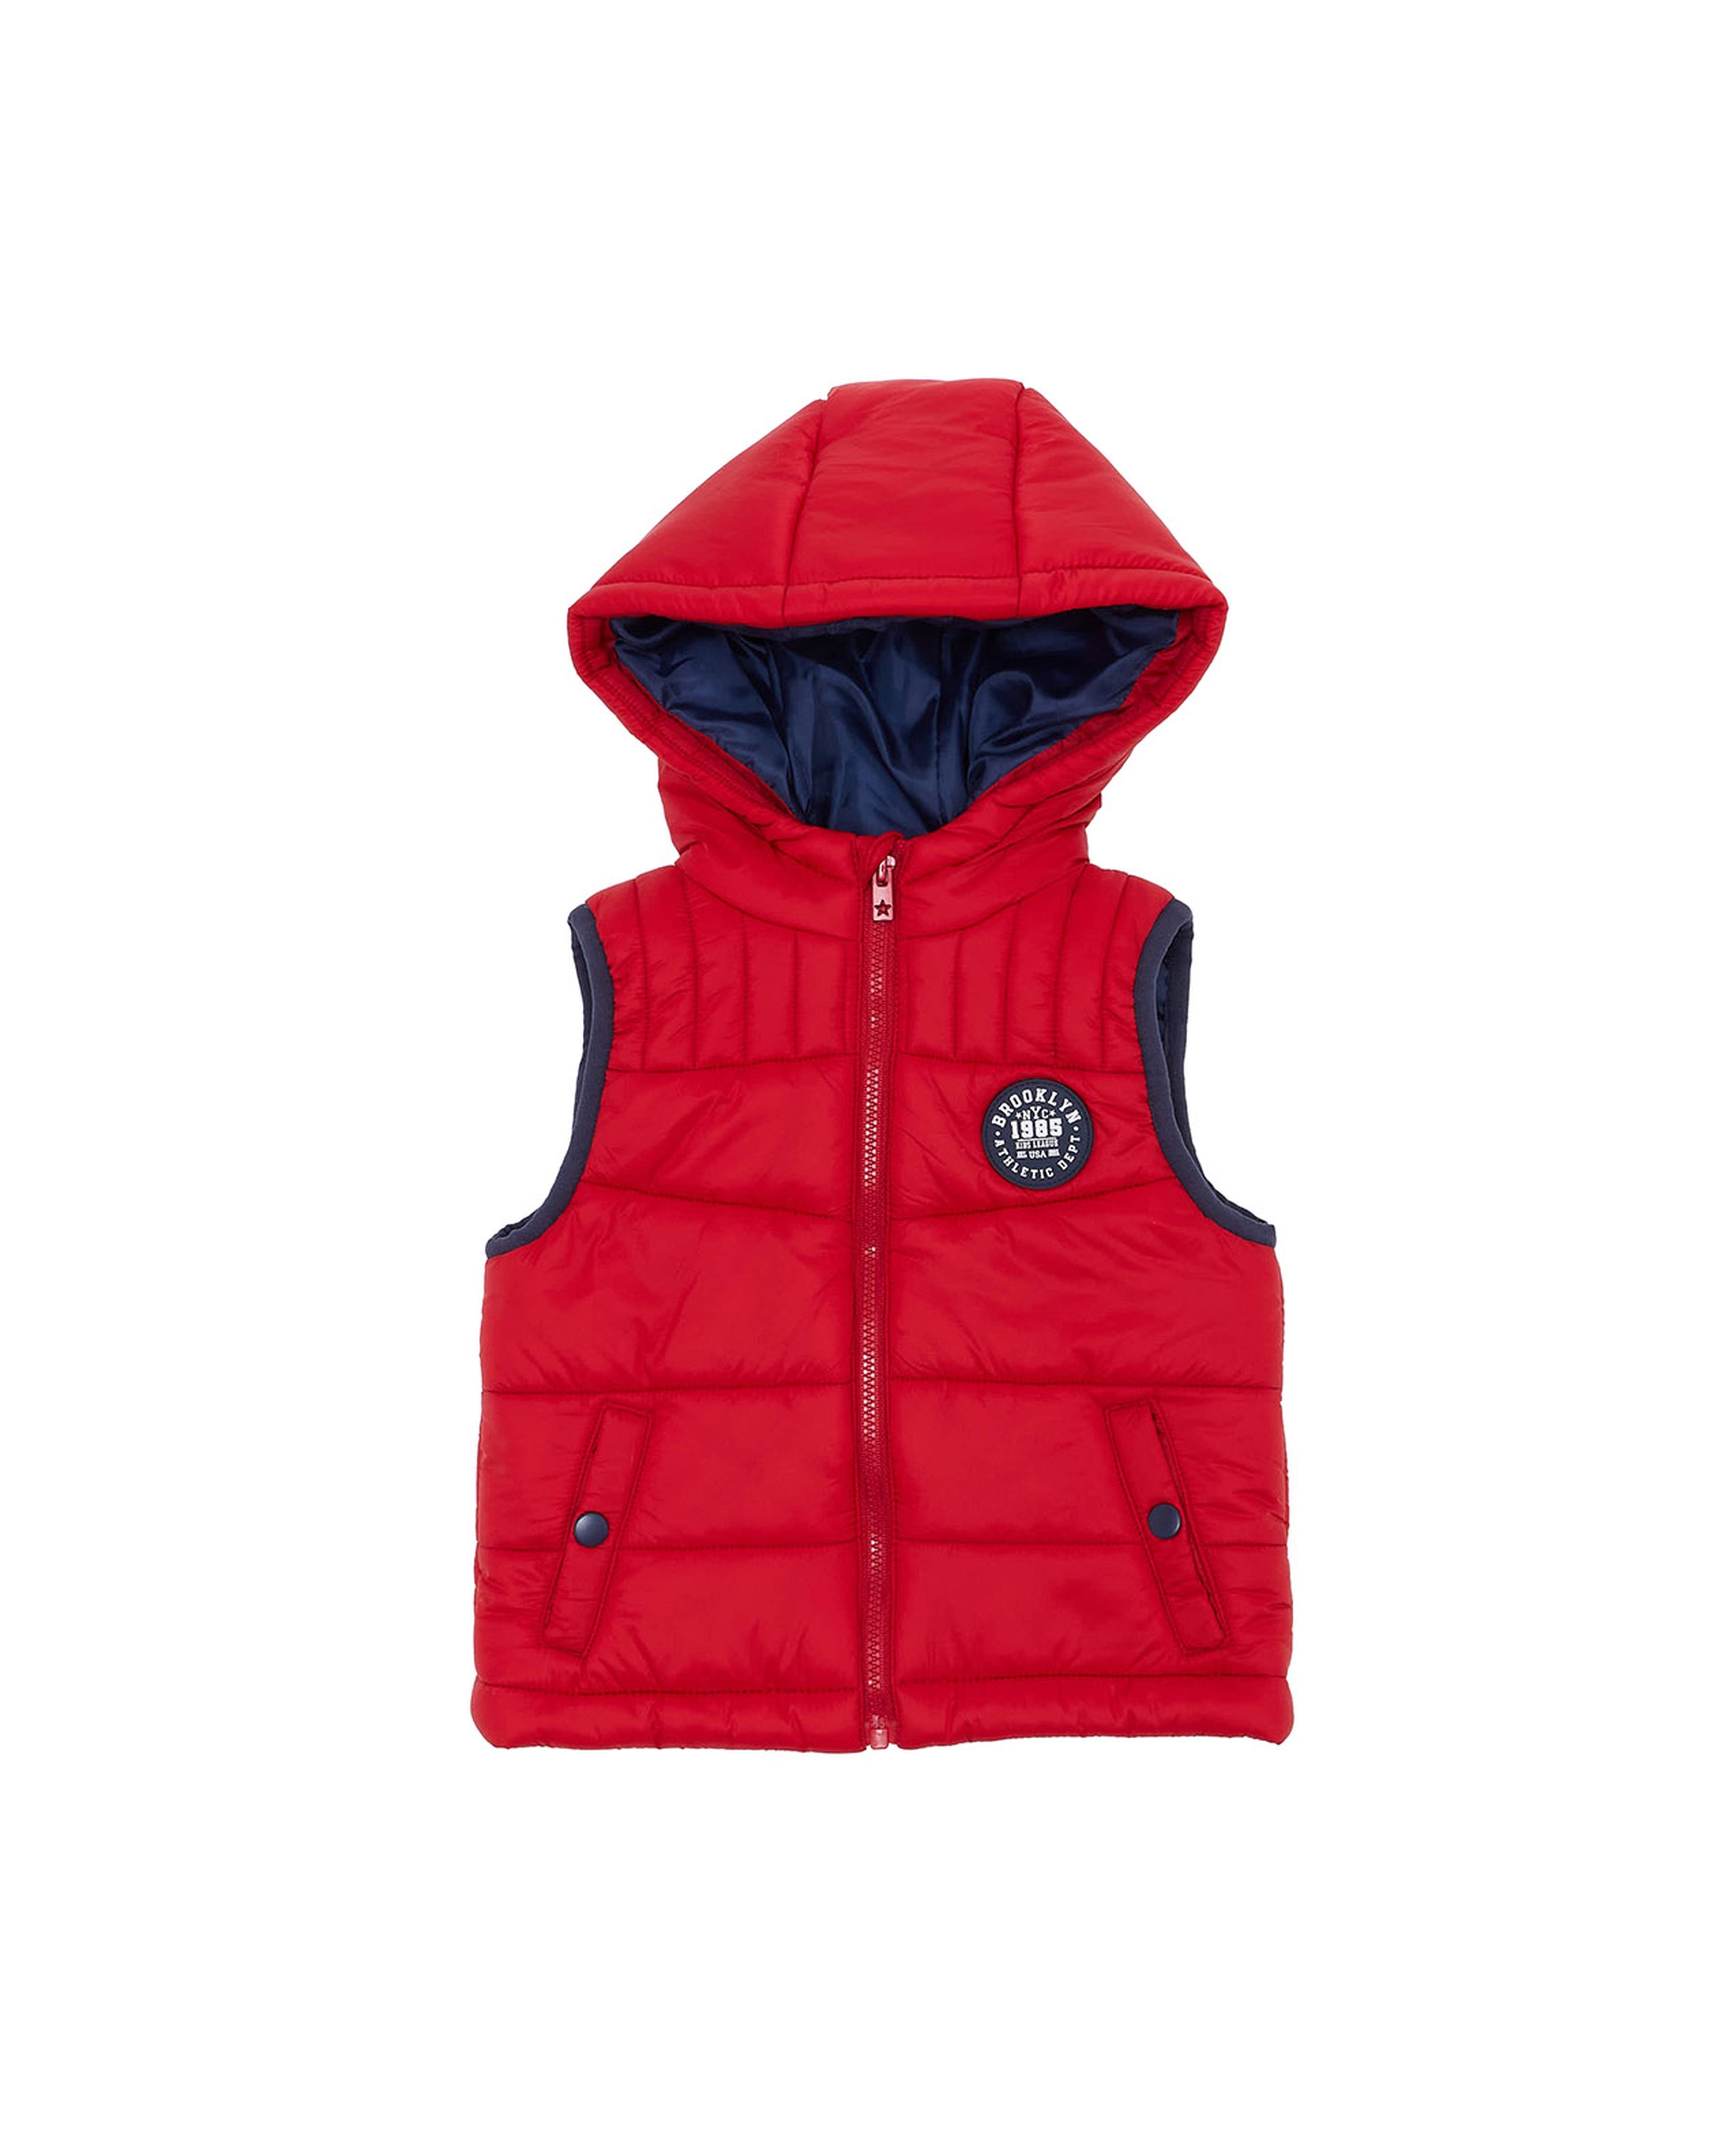 Badge Detail Hooded Gilet with Zipper Closure